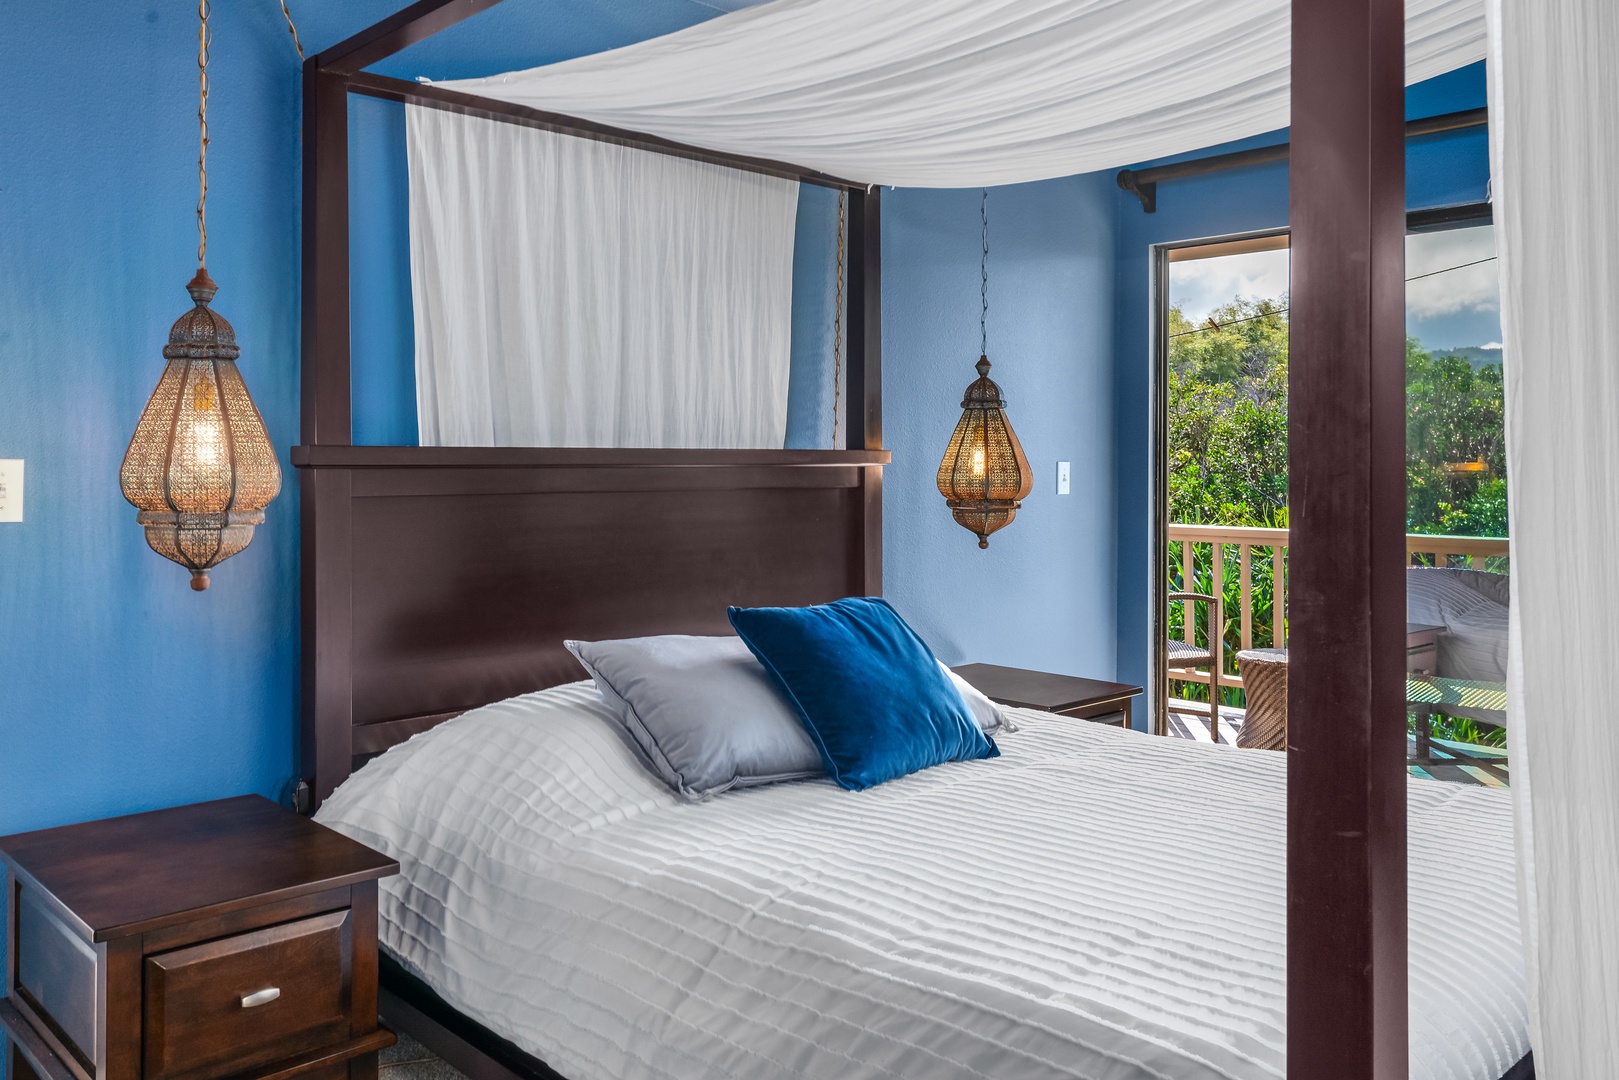 Princeville Vacation Rentals, Makanalani - Plush queen bed clothed in fine linens.